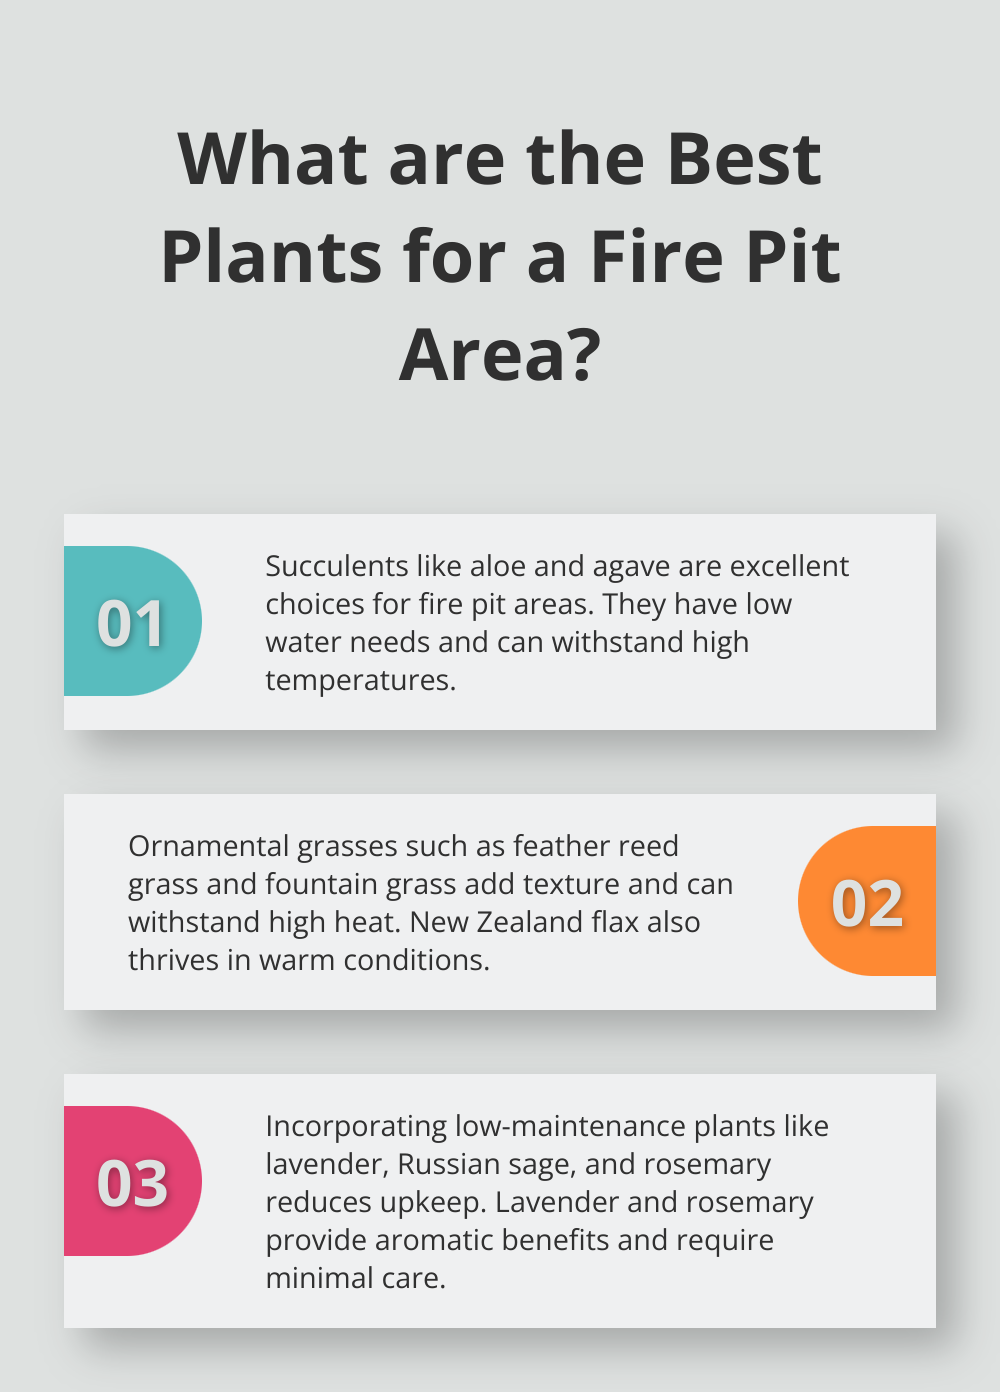 Fact - What are the Best Plants for a Fire Pit Area?